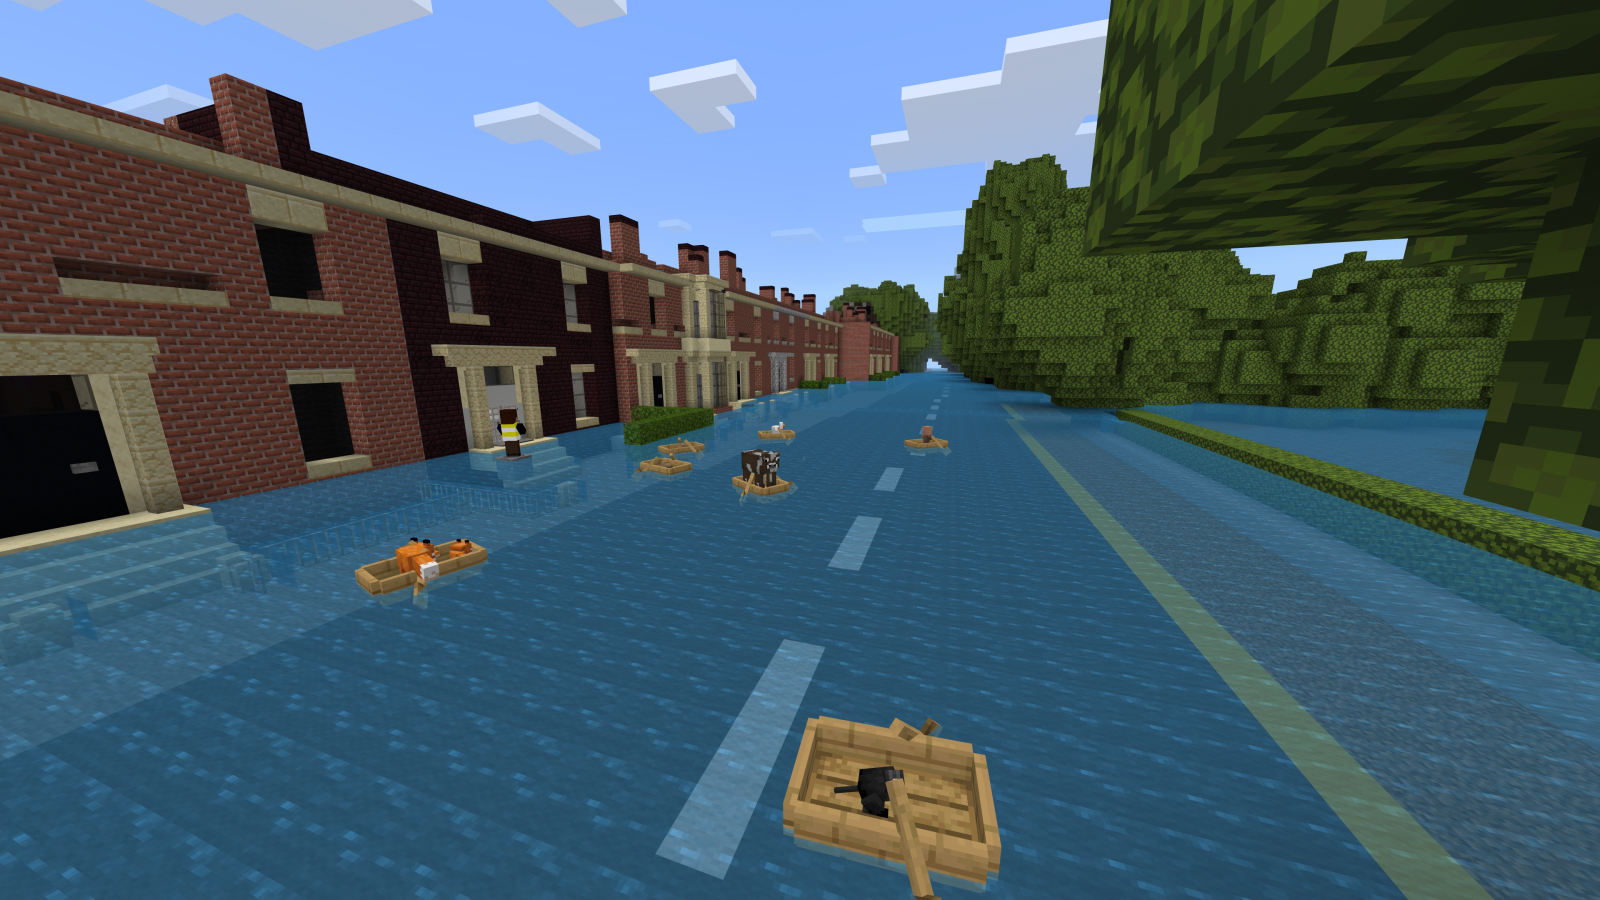 Turning the tide - A new Minecraft world is inspiring children to tackle flooding and climate change